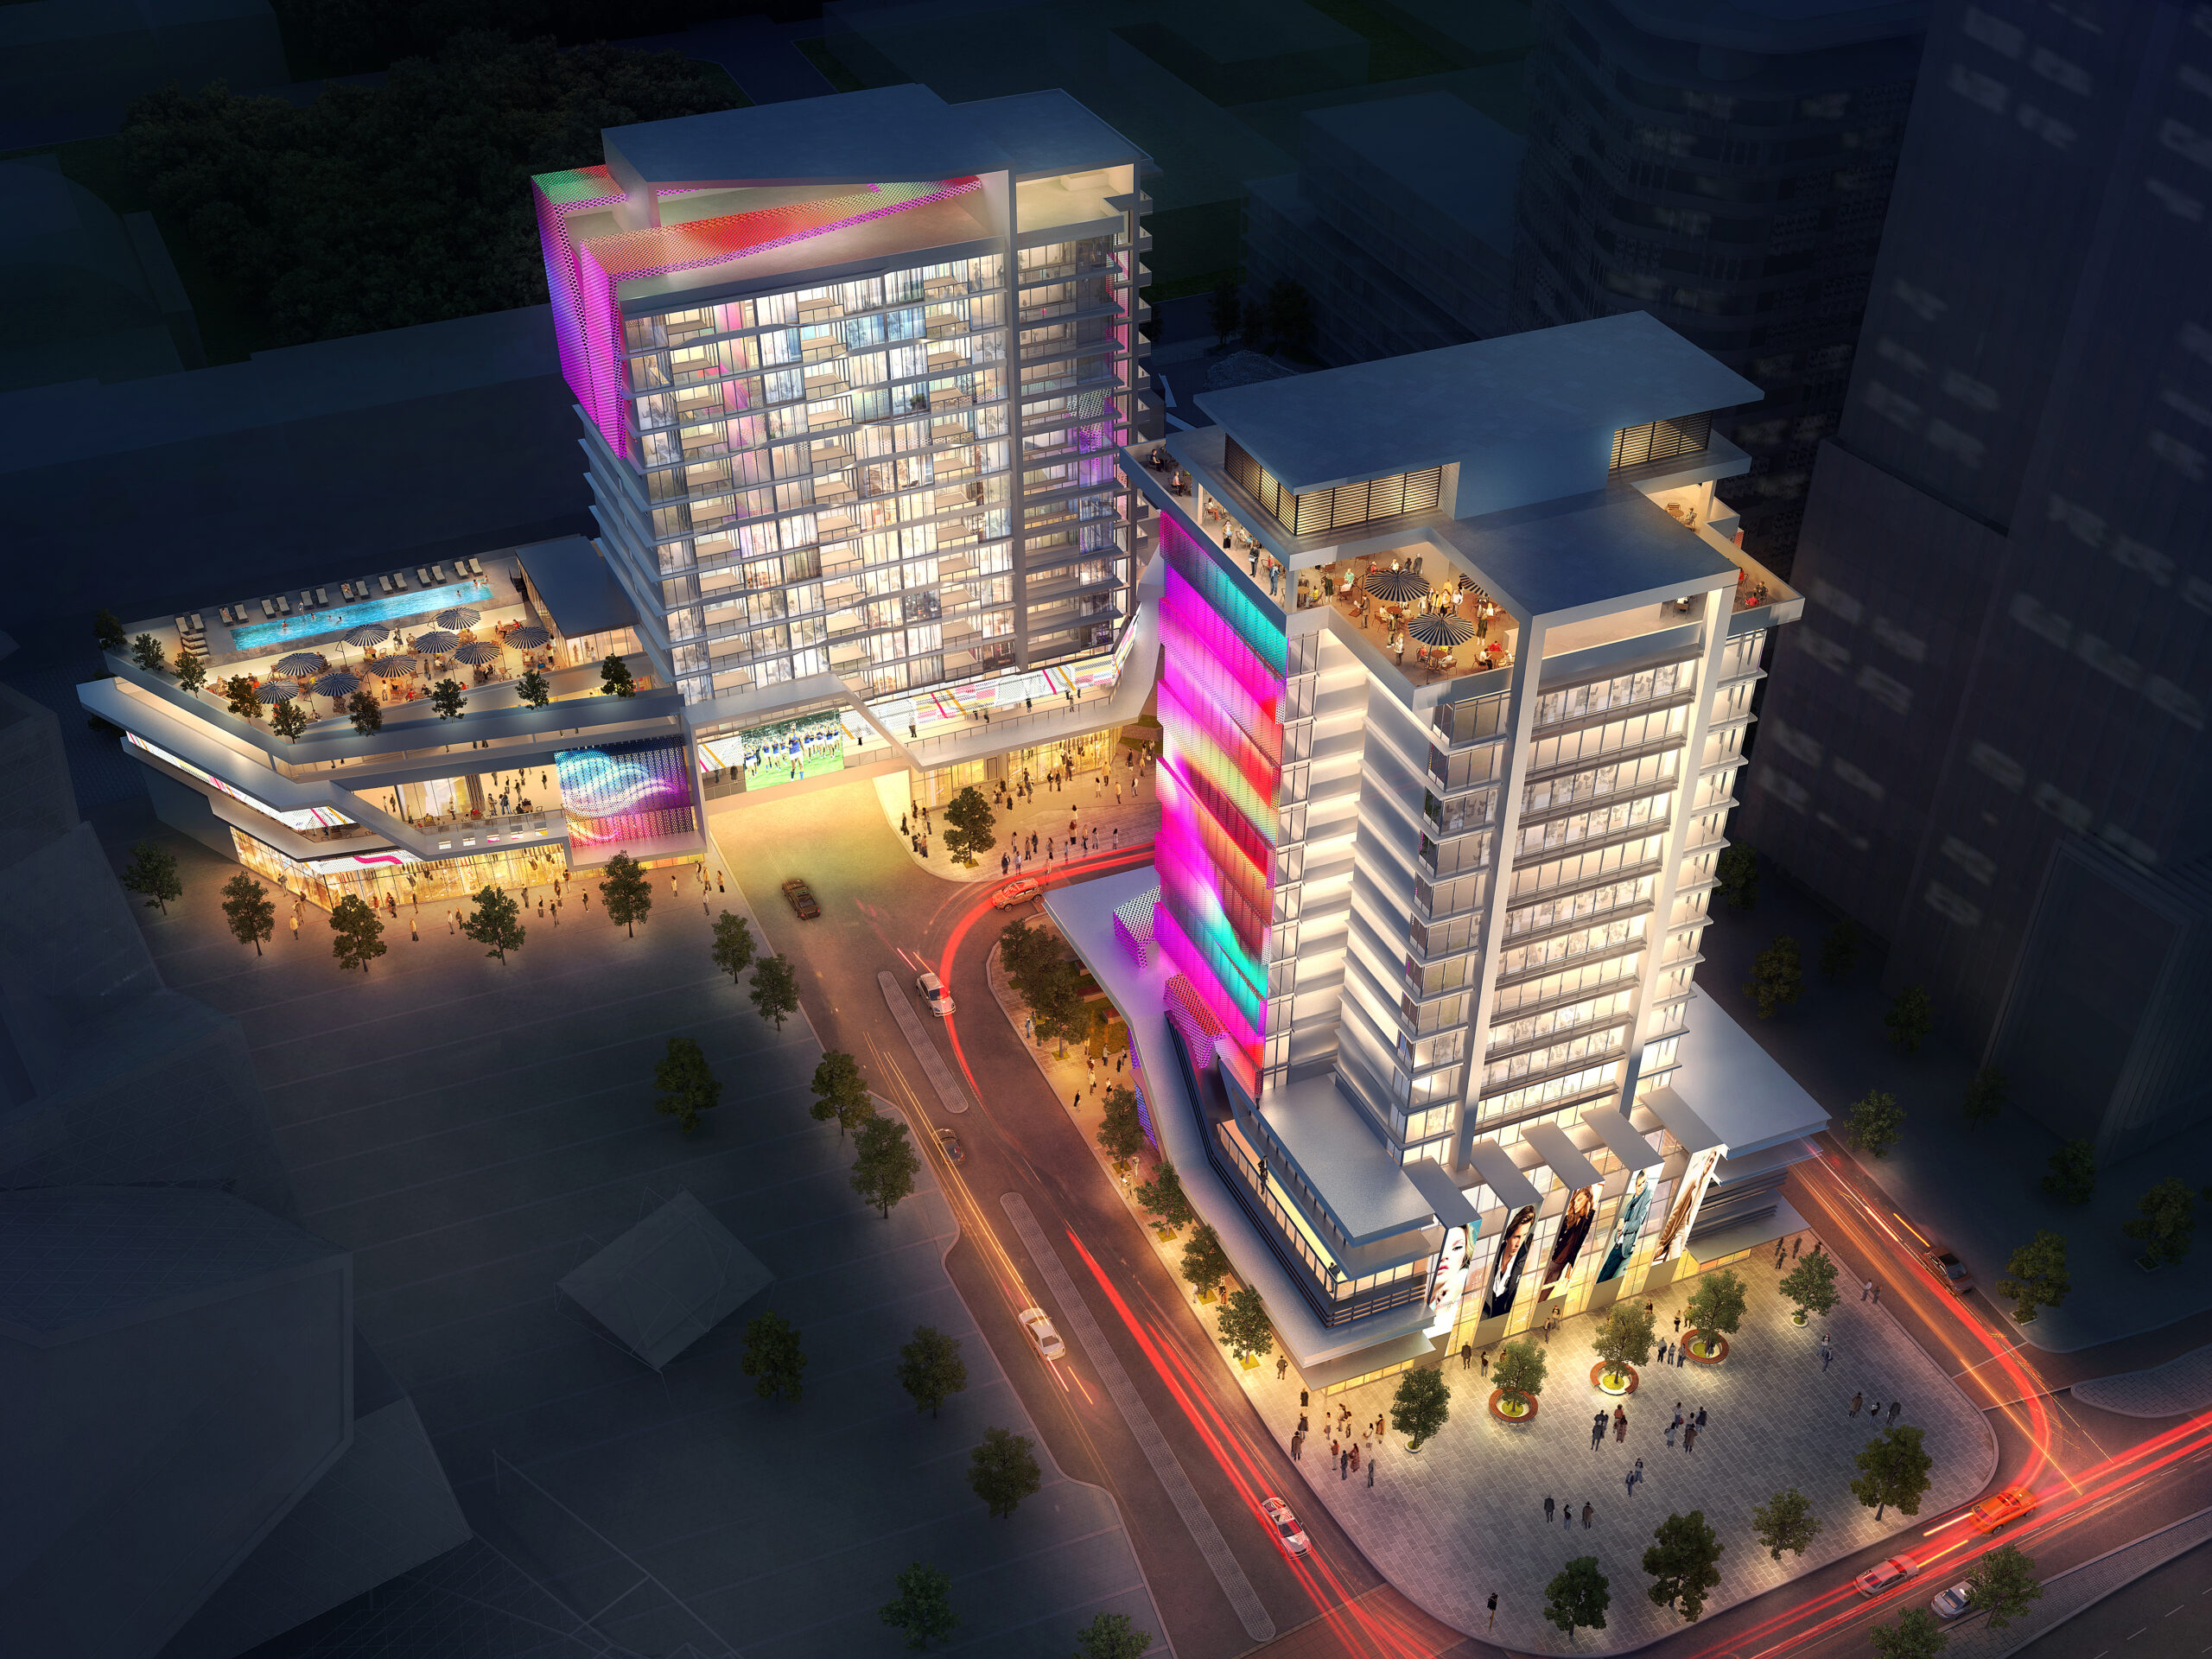 Hotel building with an illuminated facade extending the entire length, projecting vibrant colors across its face. The retail tenancies on the ground level of the podium are also illuminated, bustling with people. The image captures a lively scene at dusk